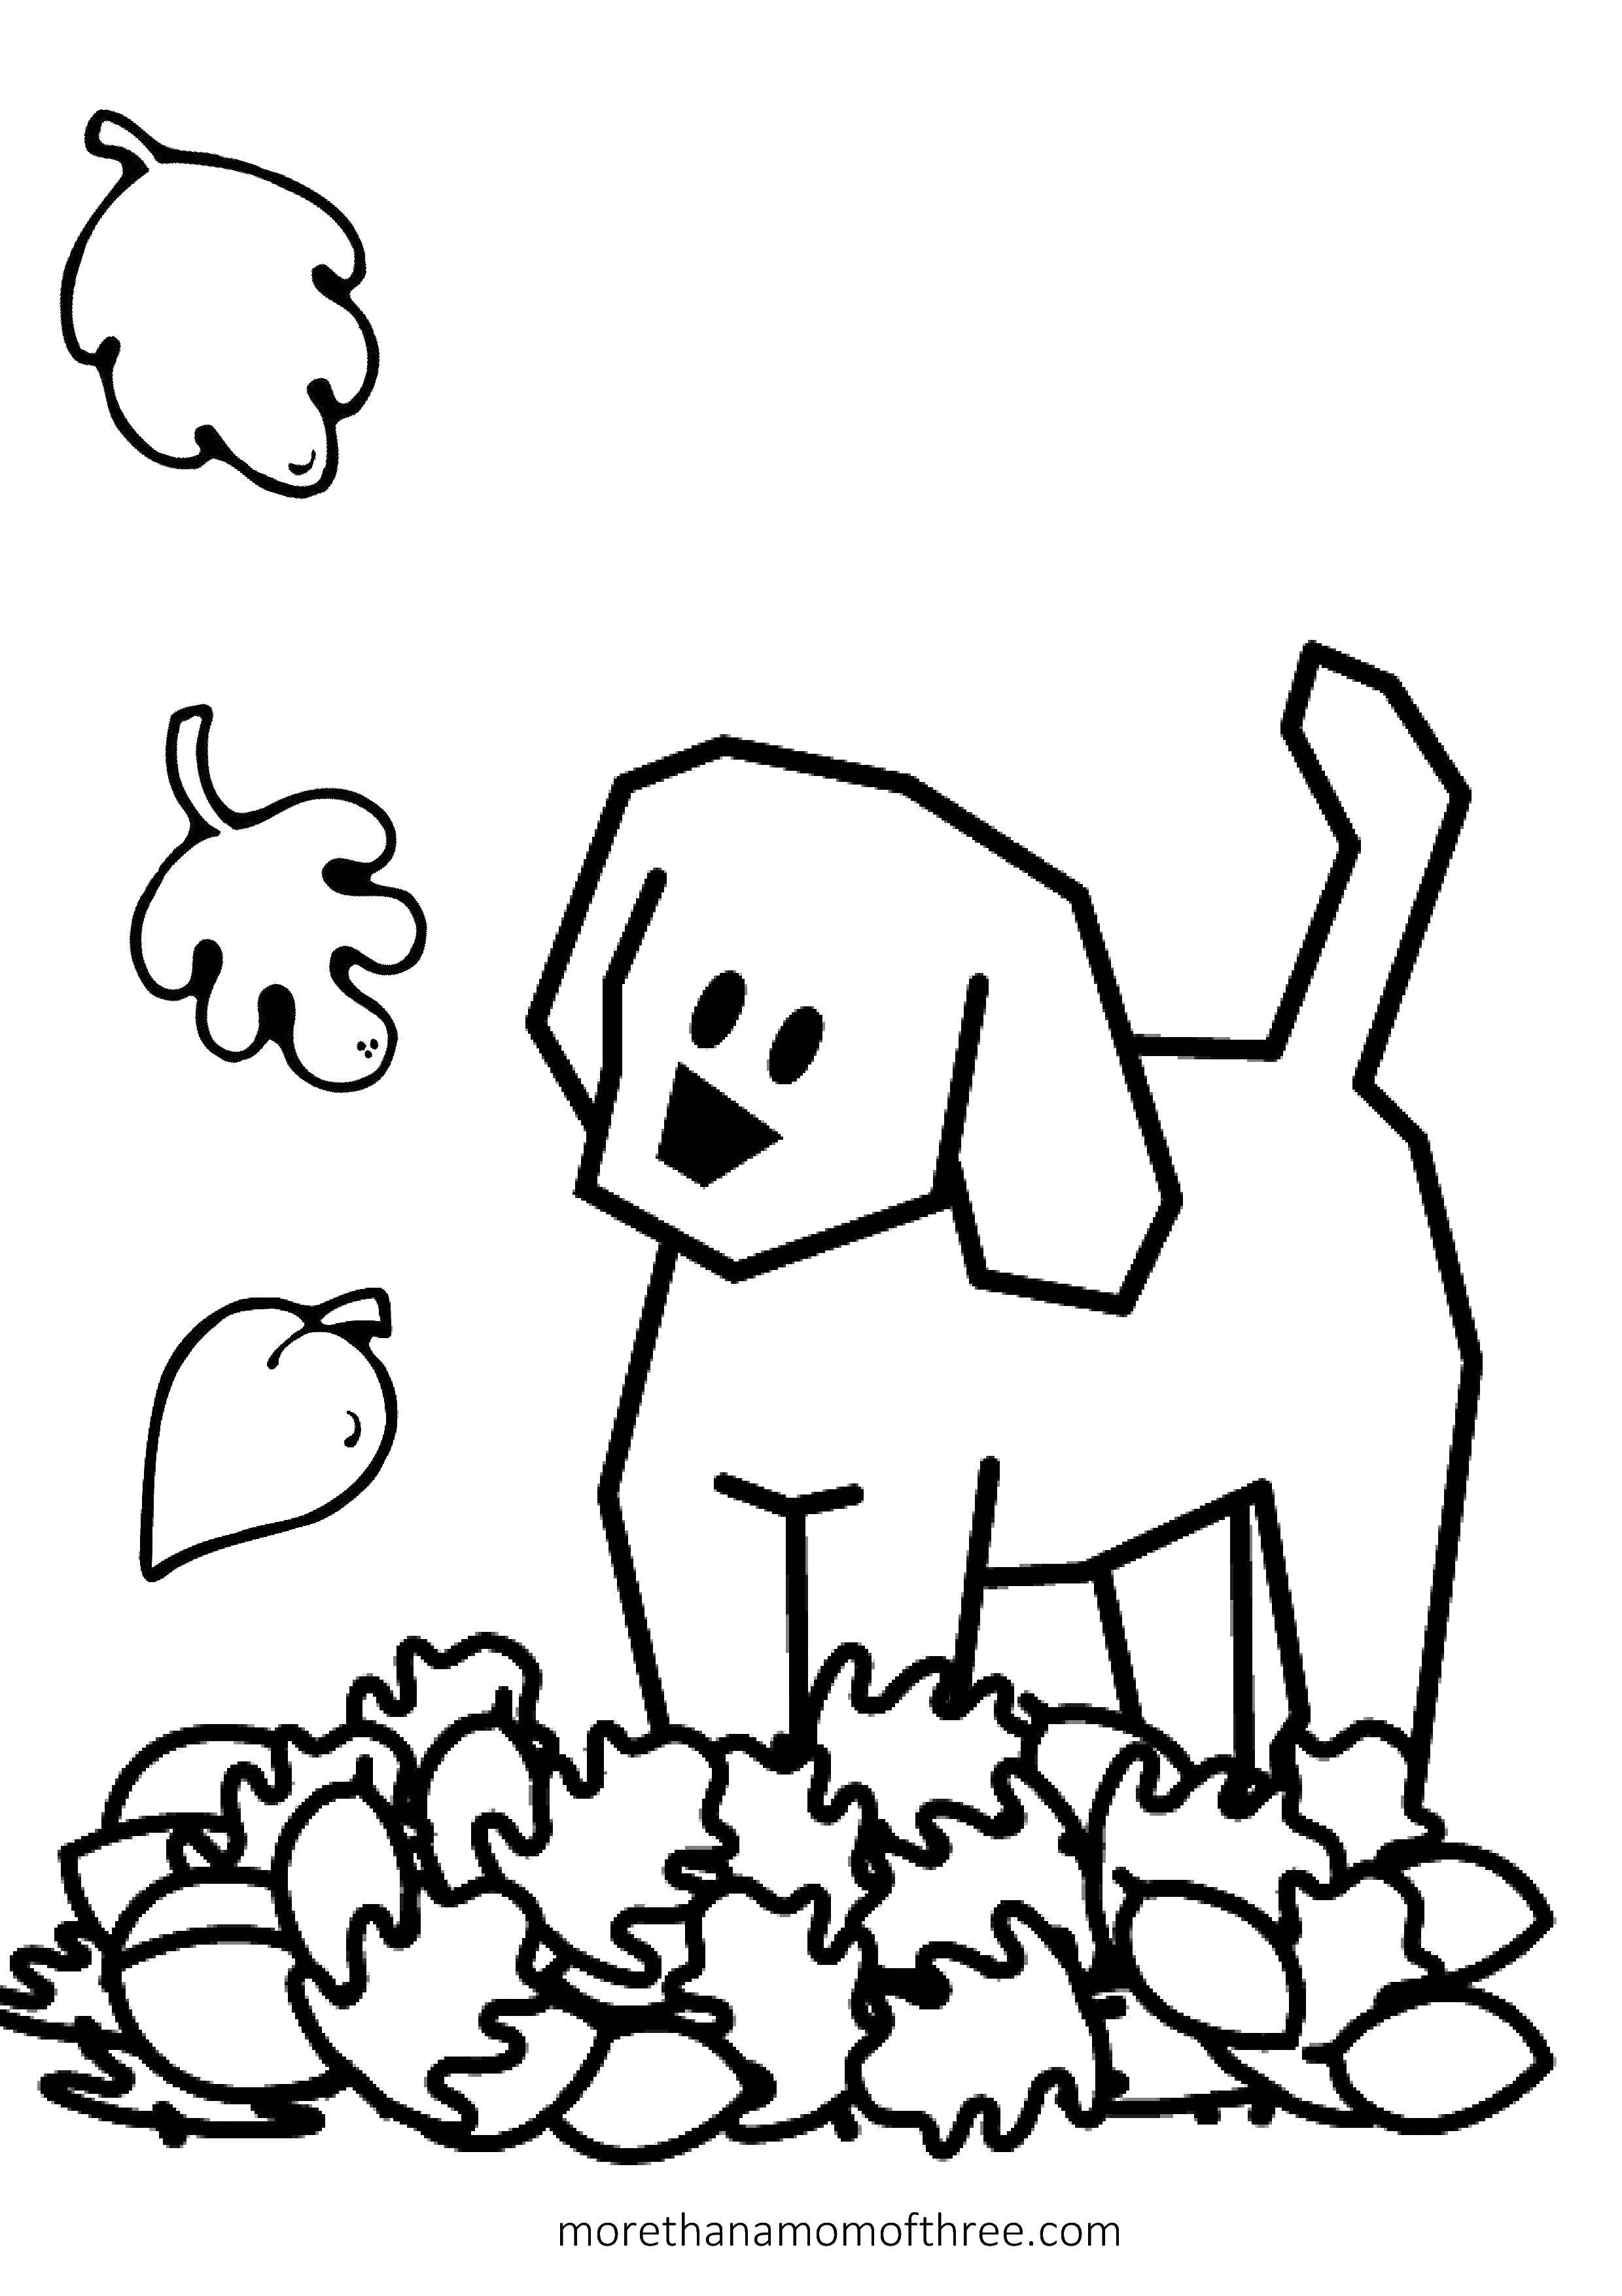 Coloring Puppy in the leaves. Category Autumn leaves falling. Tags:  Animals, dog.